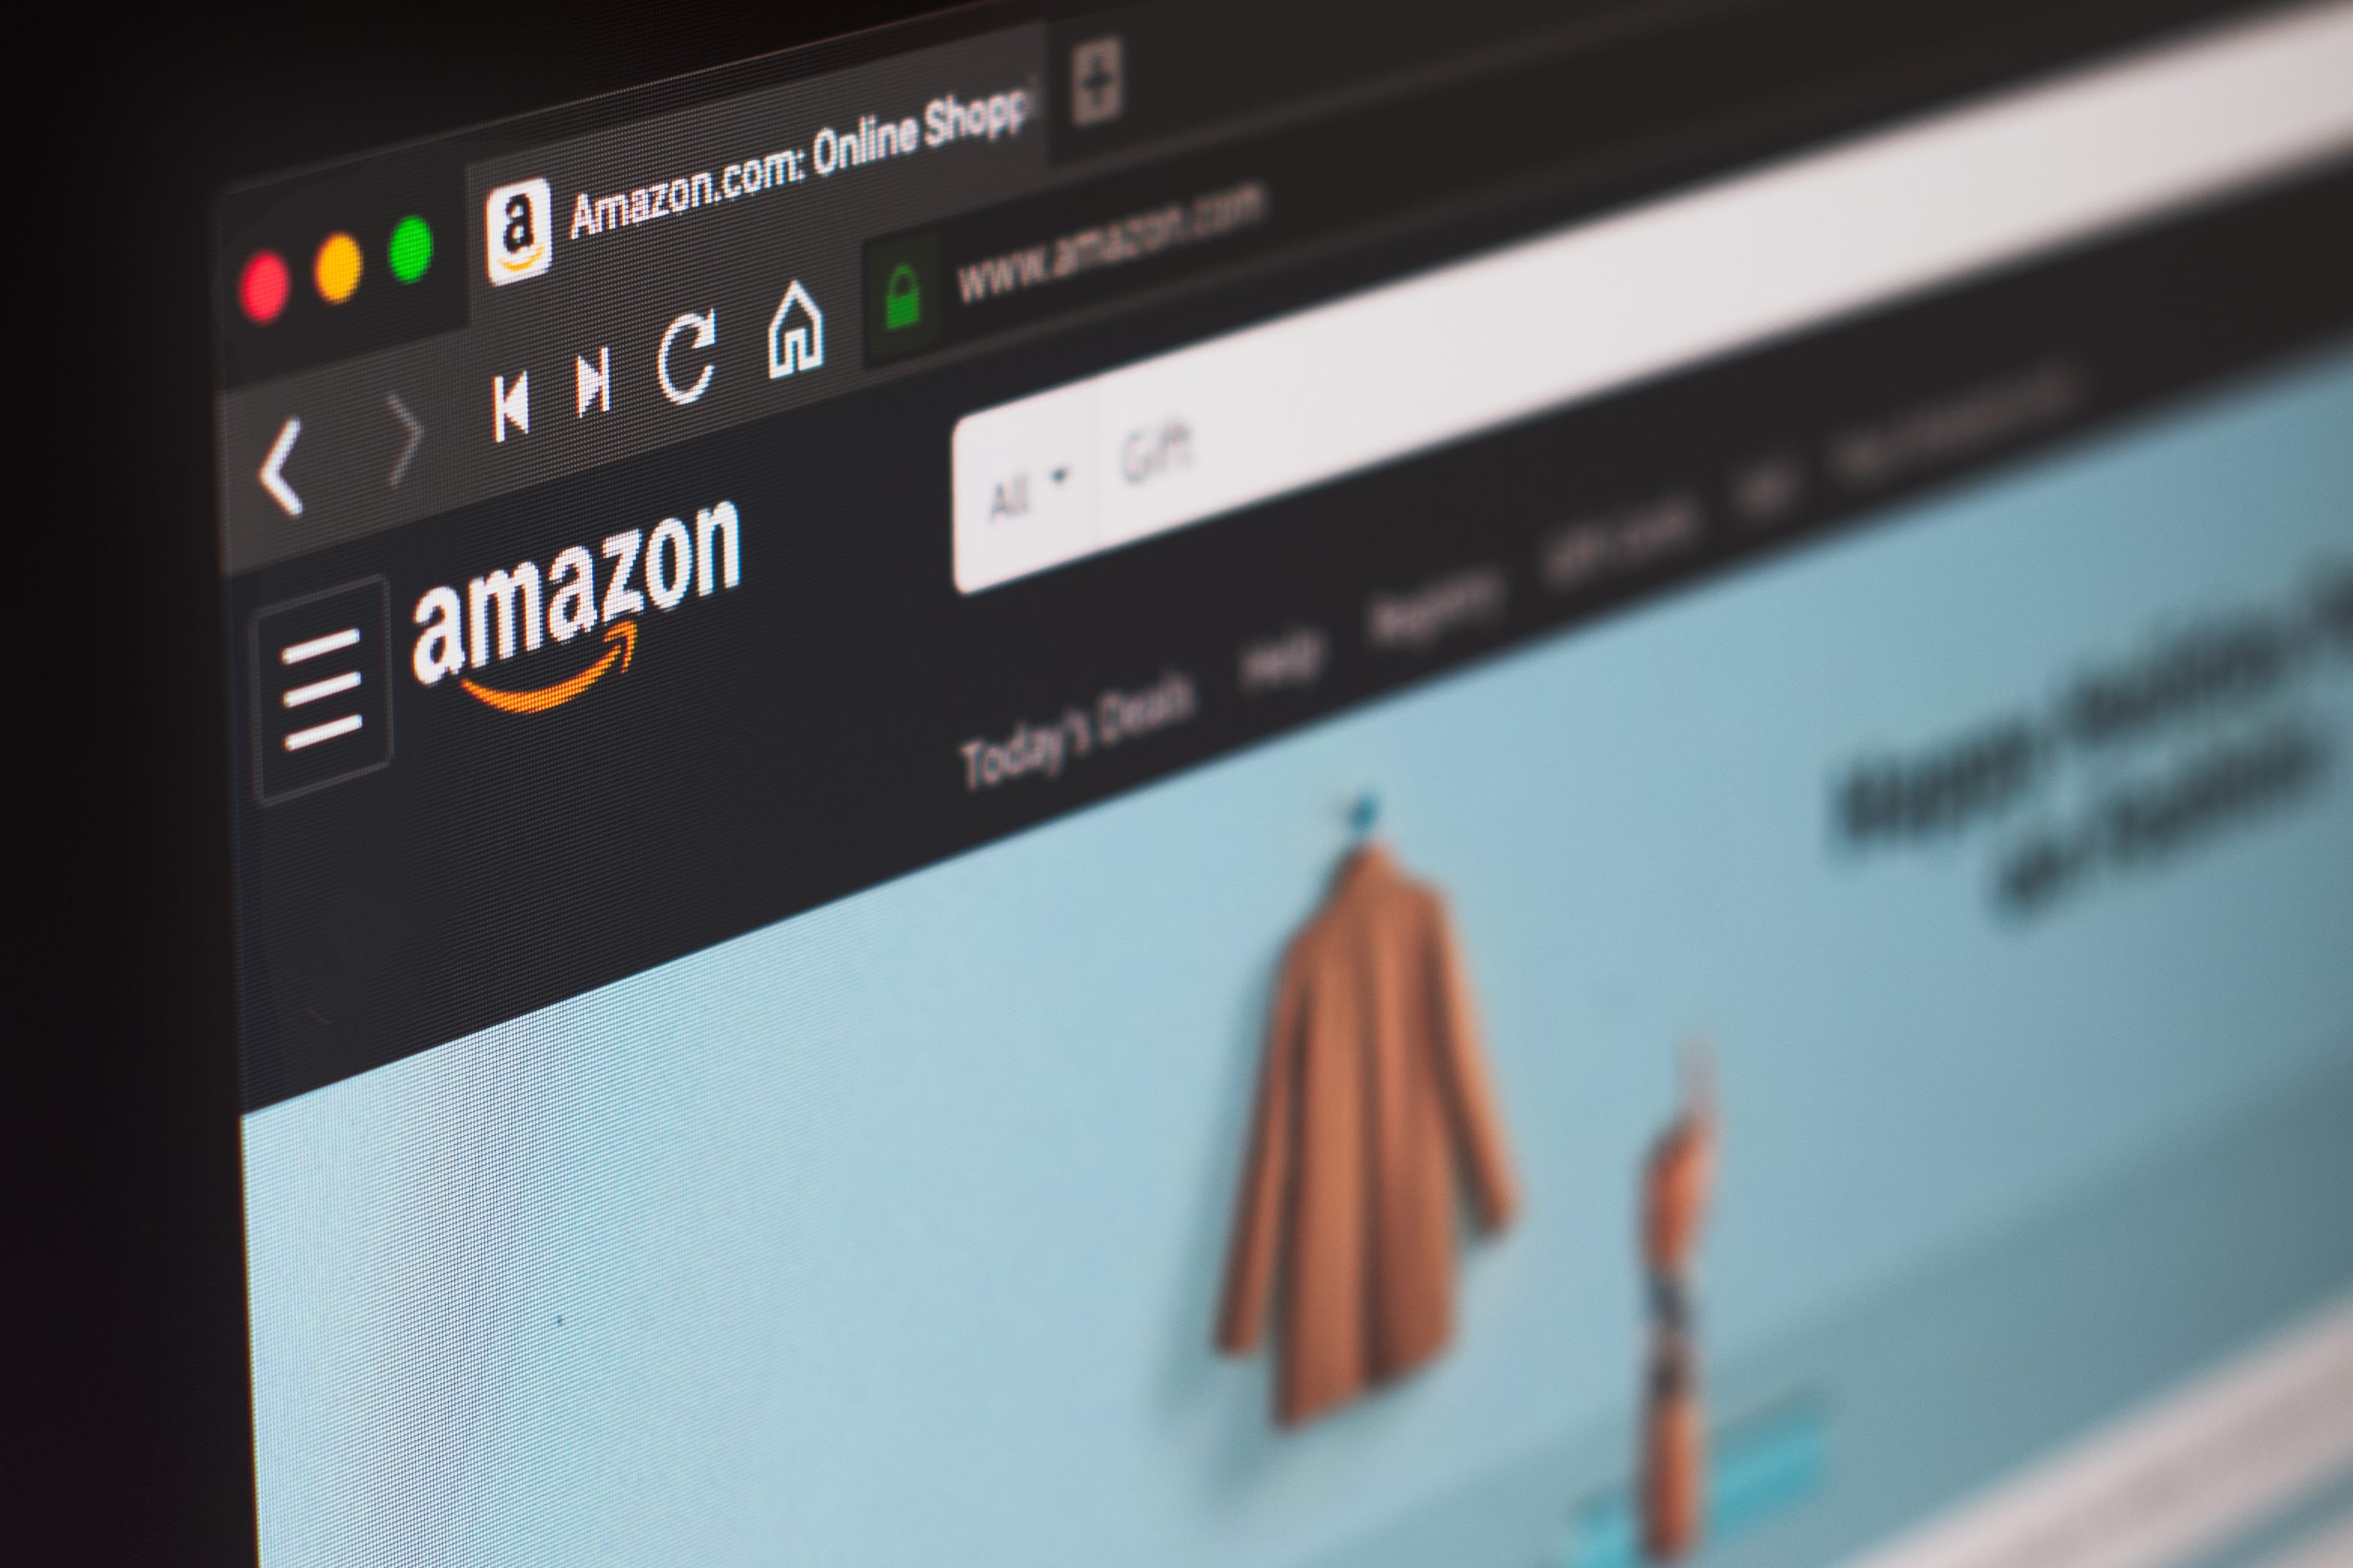 Common Characteristics of Best-Selling Items On Amazon